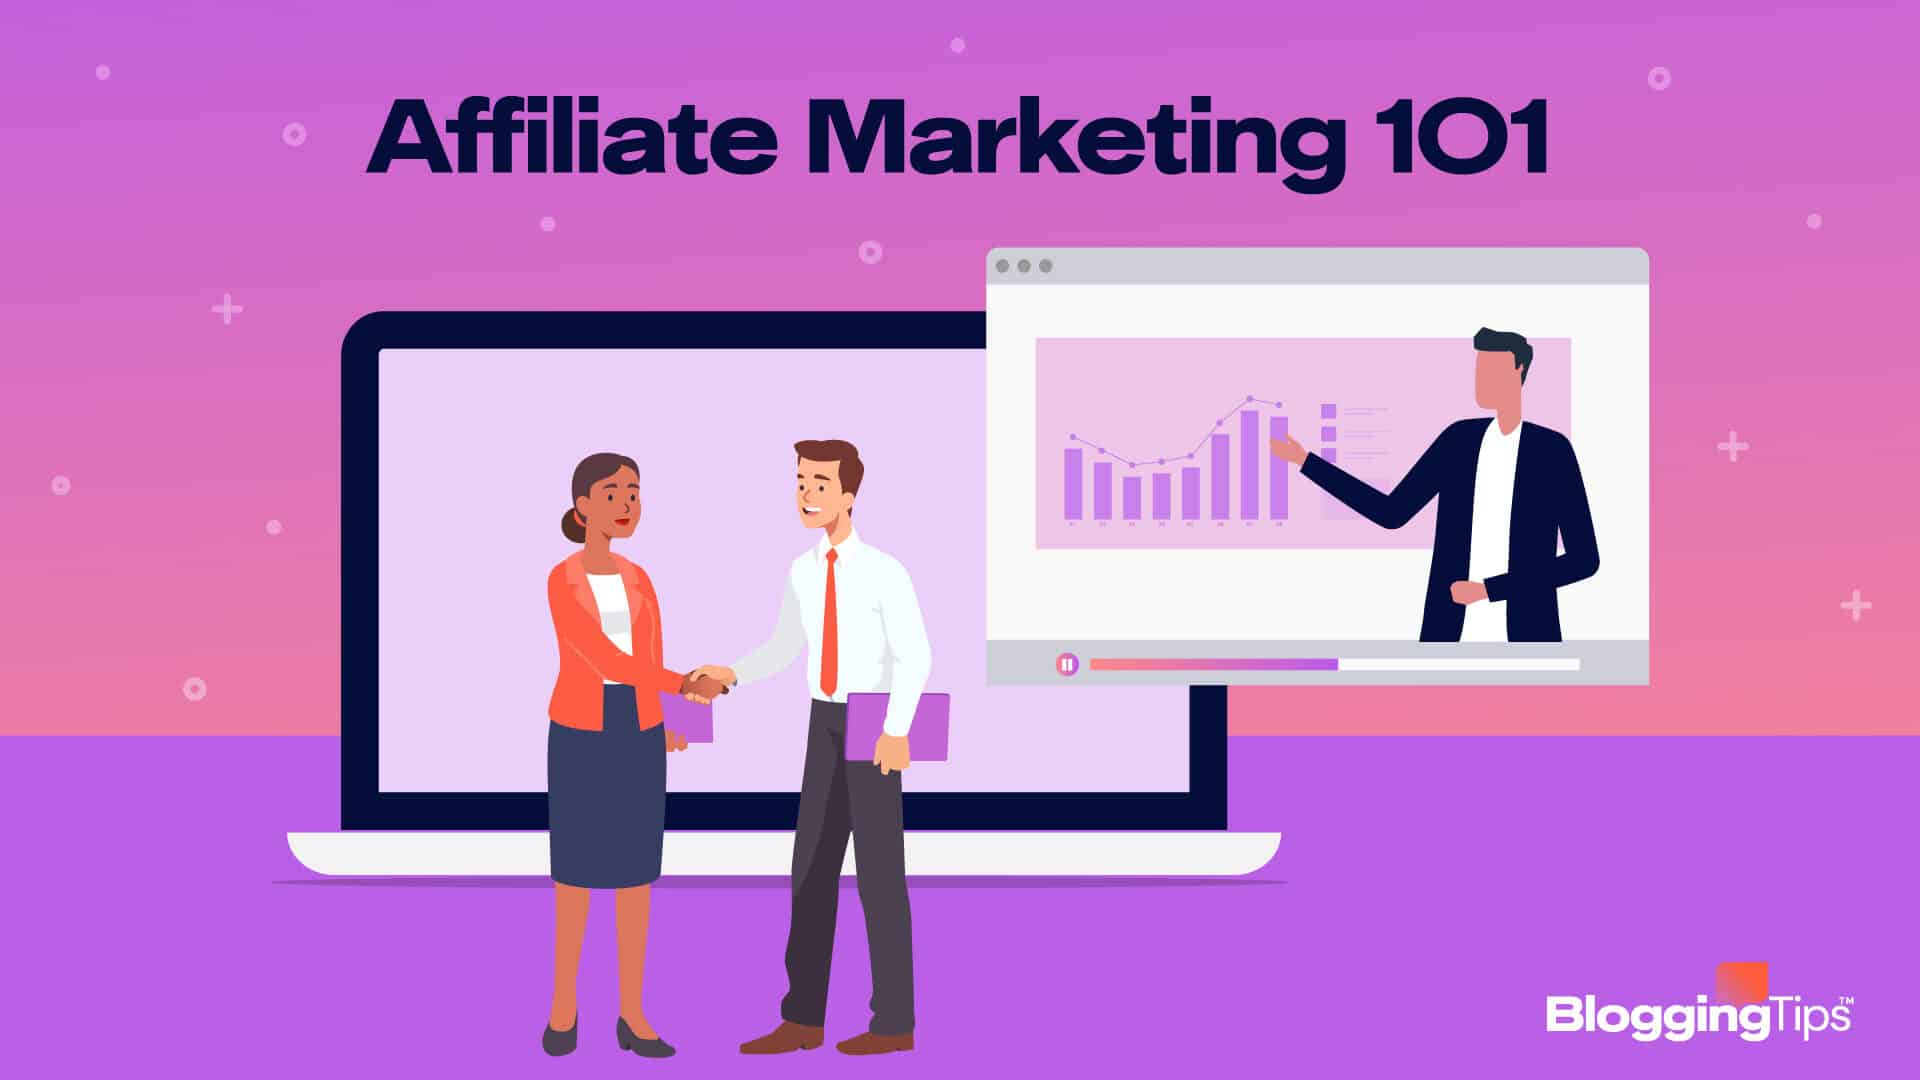 vector graphic showing an illustration showing people learn affiliate marketing